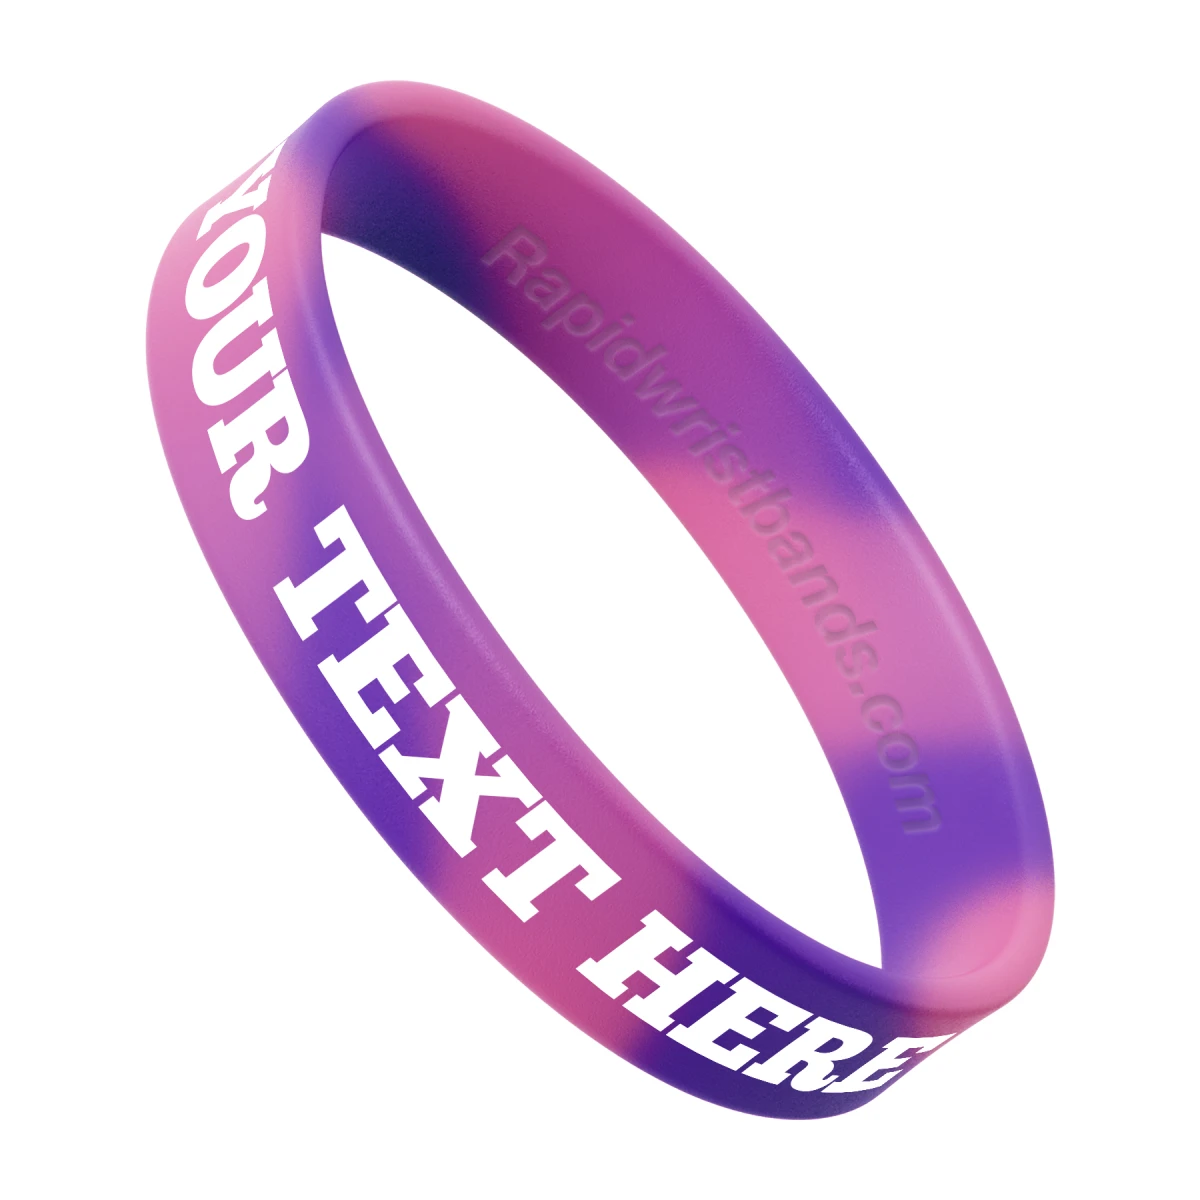 Swirl Pink/Purple Wristband With Your Text Here Printed In White